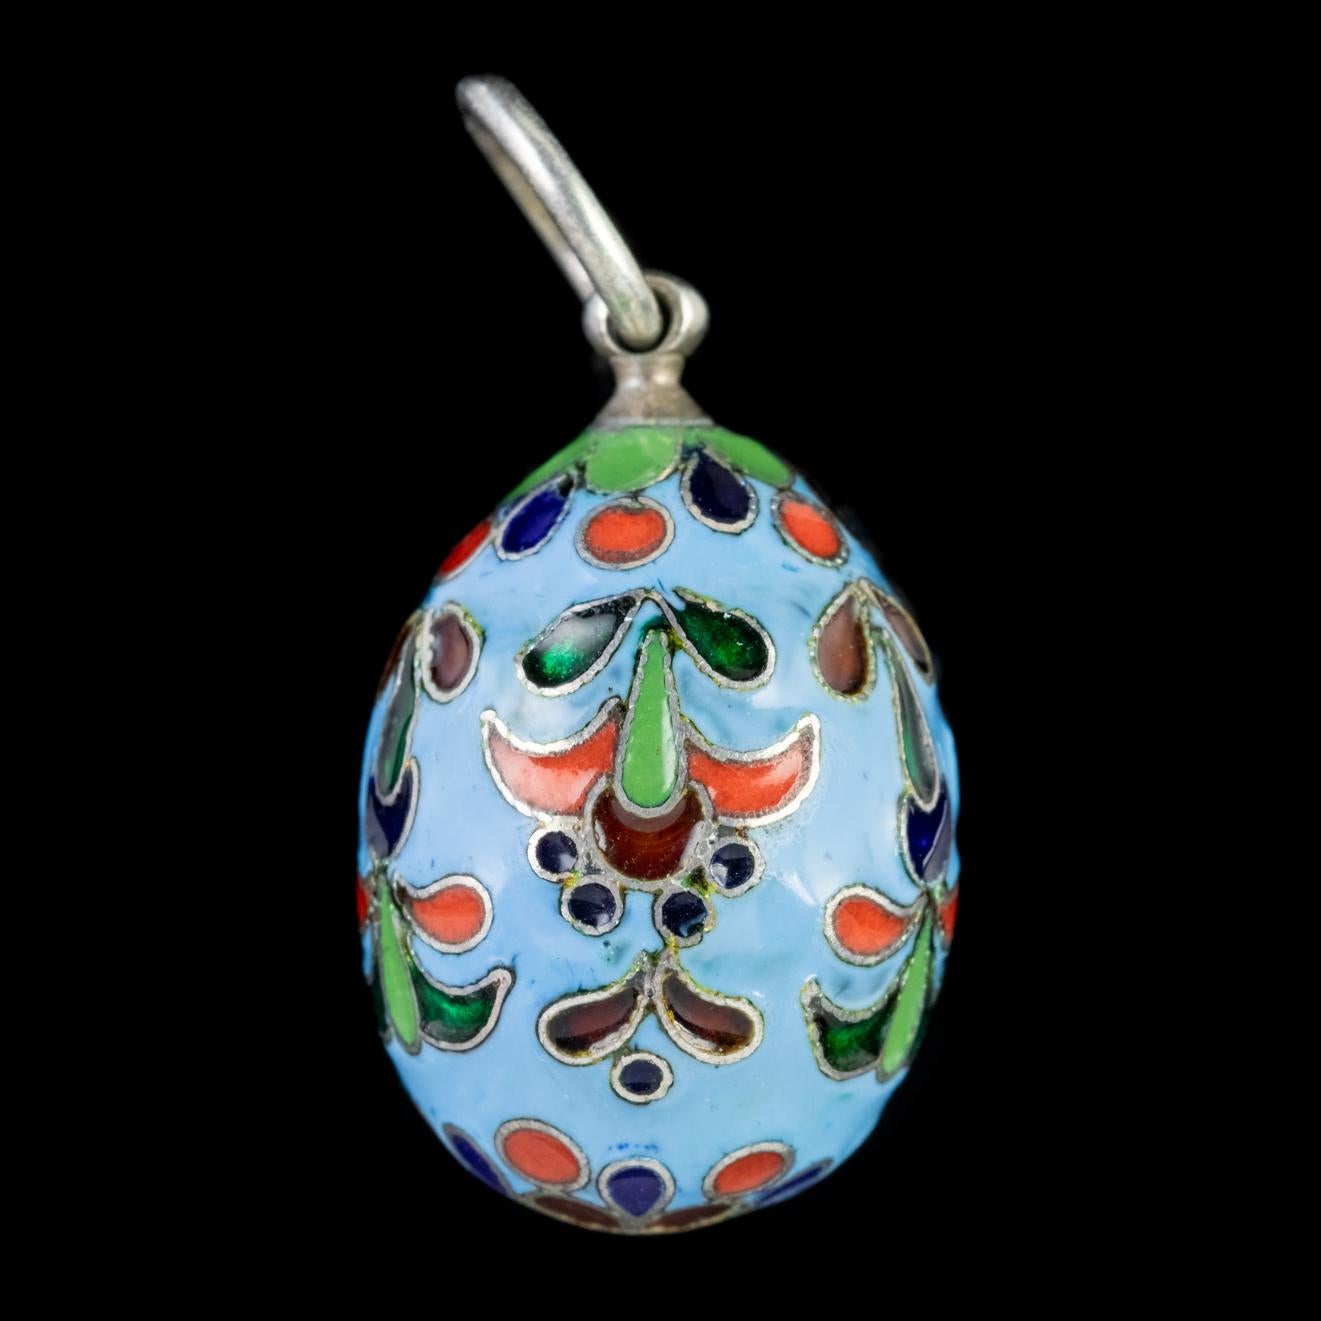 A fabulous little Vintage pendant from the 1930s fashioned in a similar design to that of a Faberge Egg. 

The pendant is decorated in beautiful Enamel workmanship which features colourful foliate motifs upon a pale blue setting. 

The piece is all